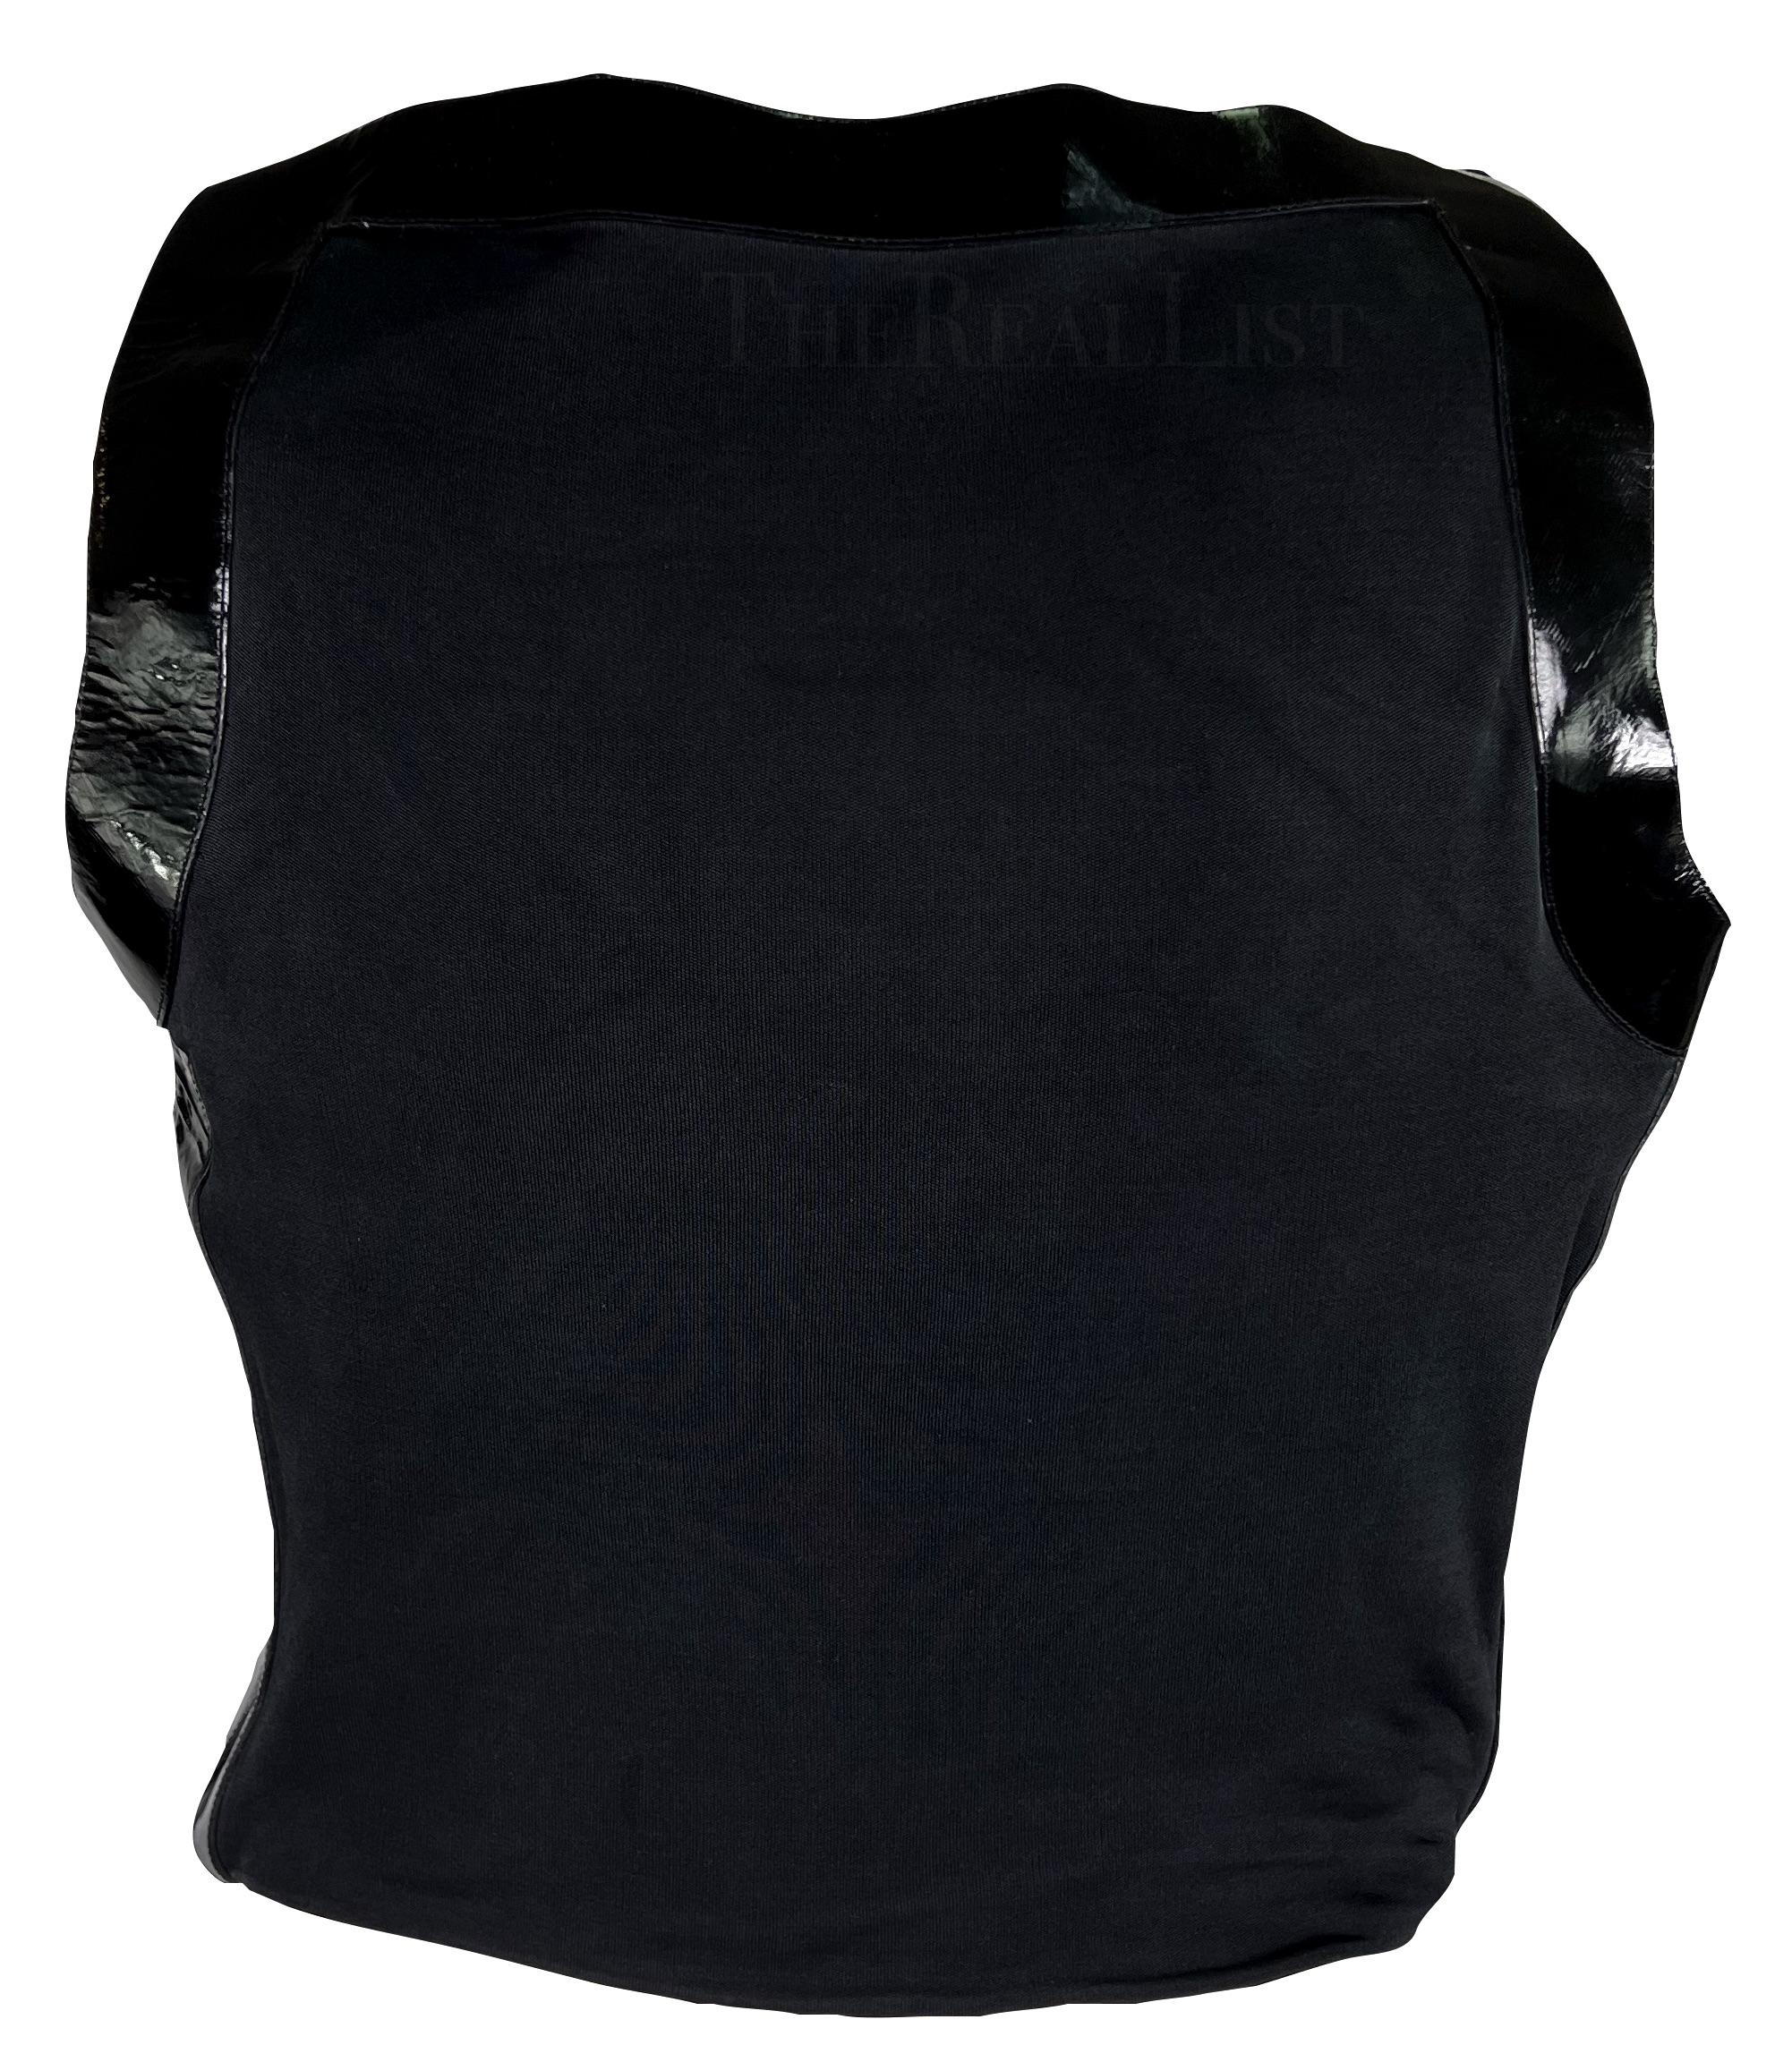 Women's S/S 1999 Gucci by Tom Ford Black Patent Leather Accent Crop Top  For Sale